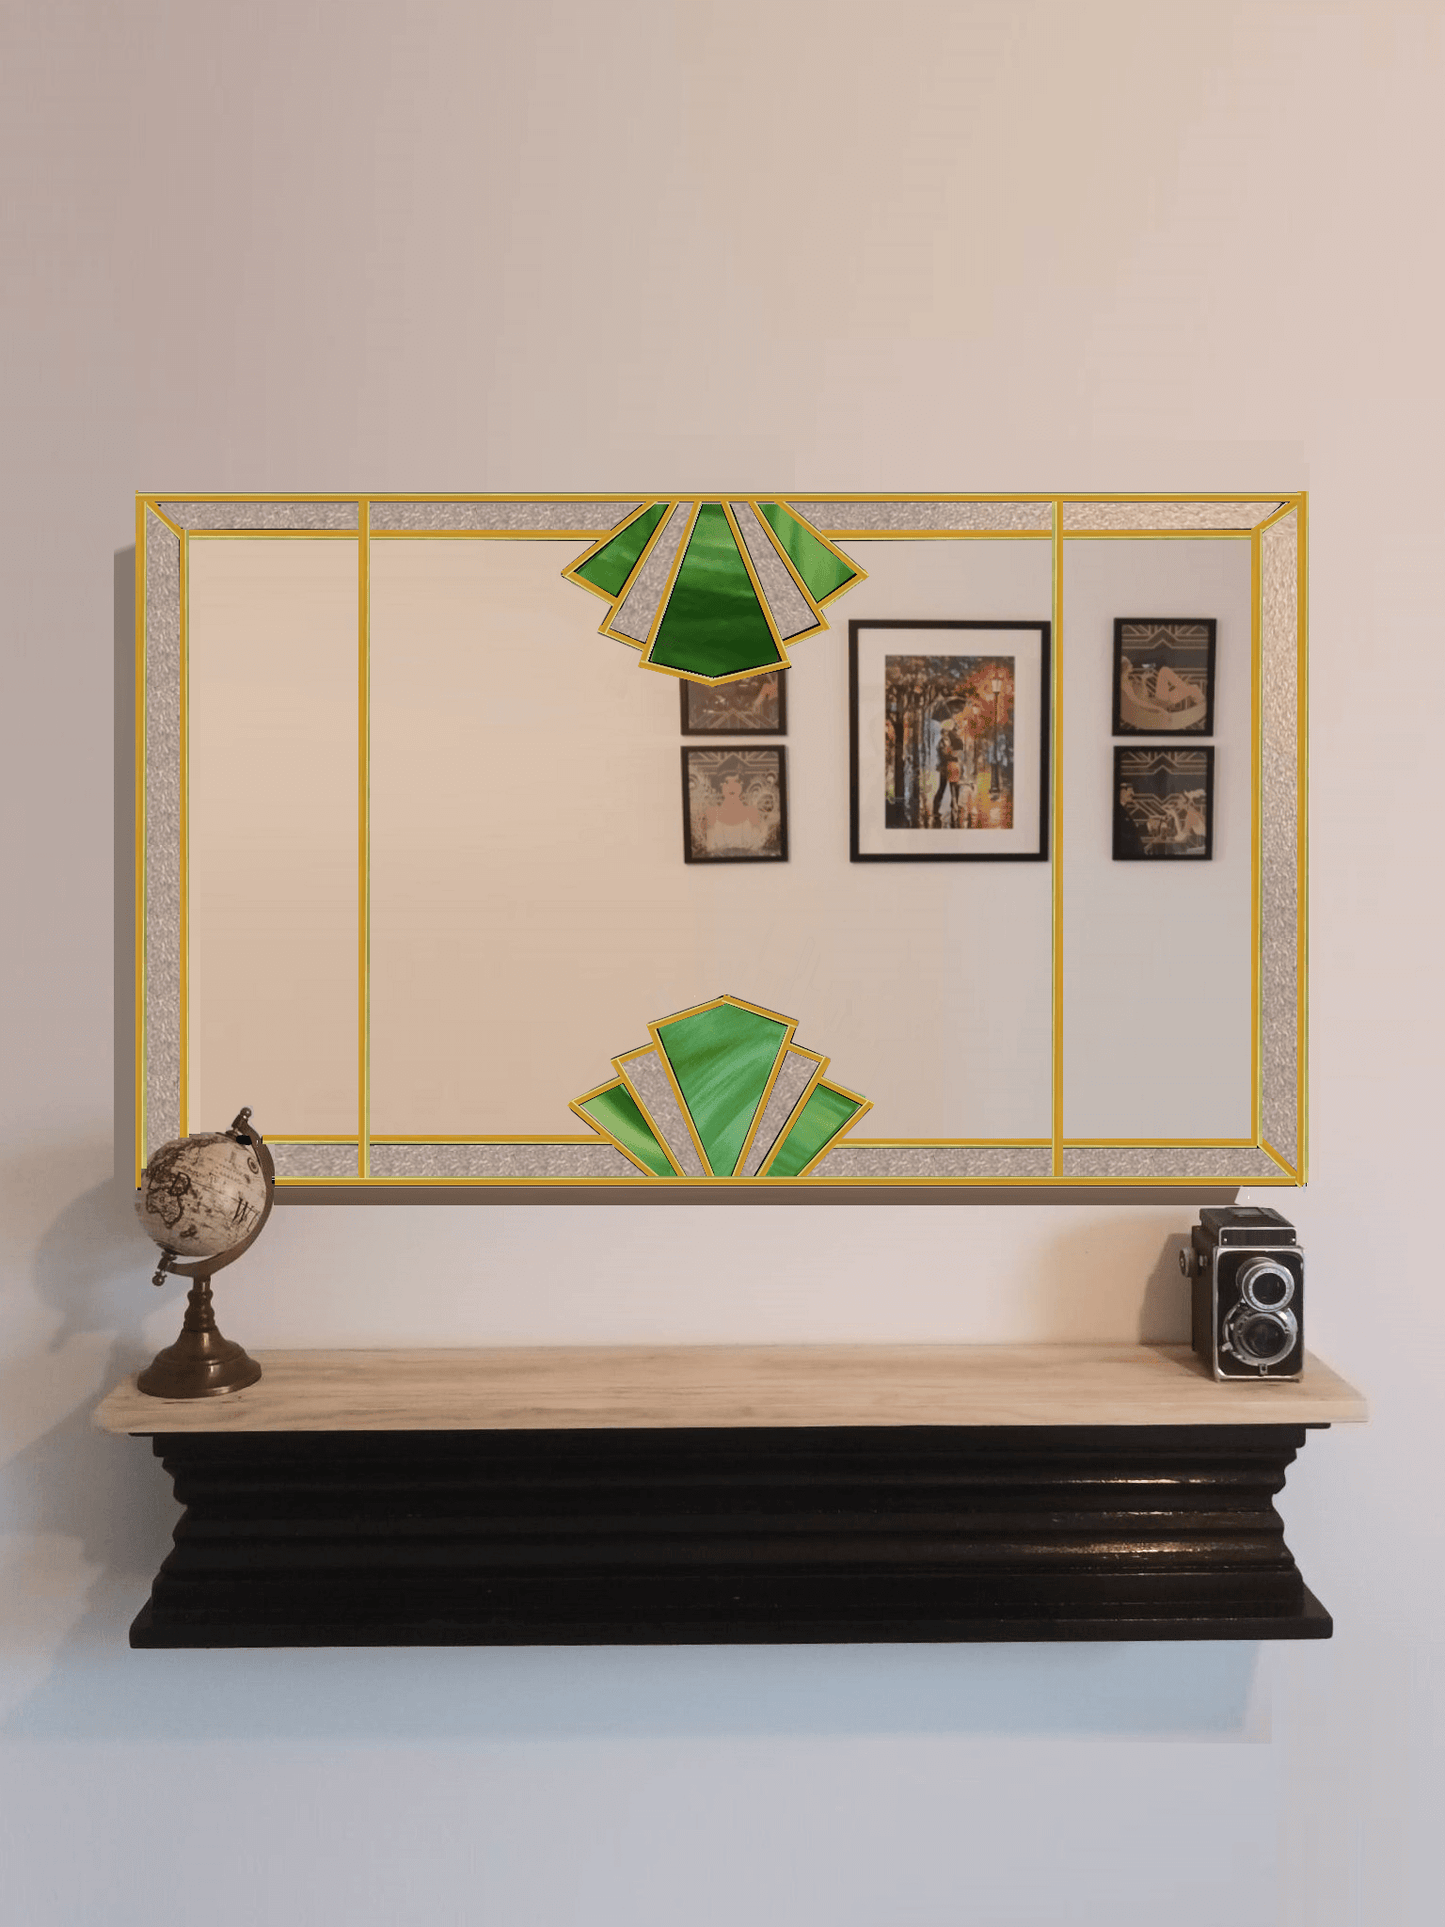 Brass/ Gold and green stain glass mirror